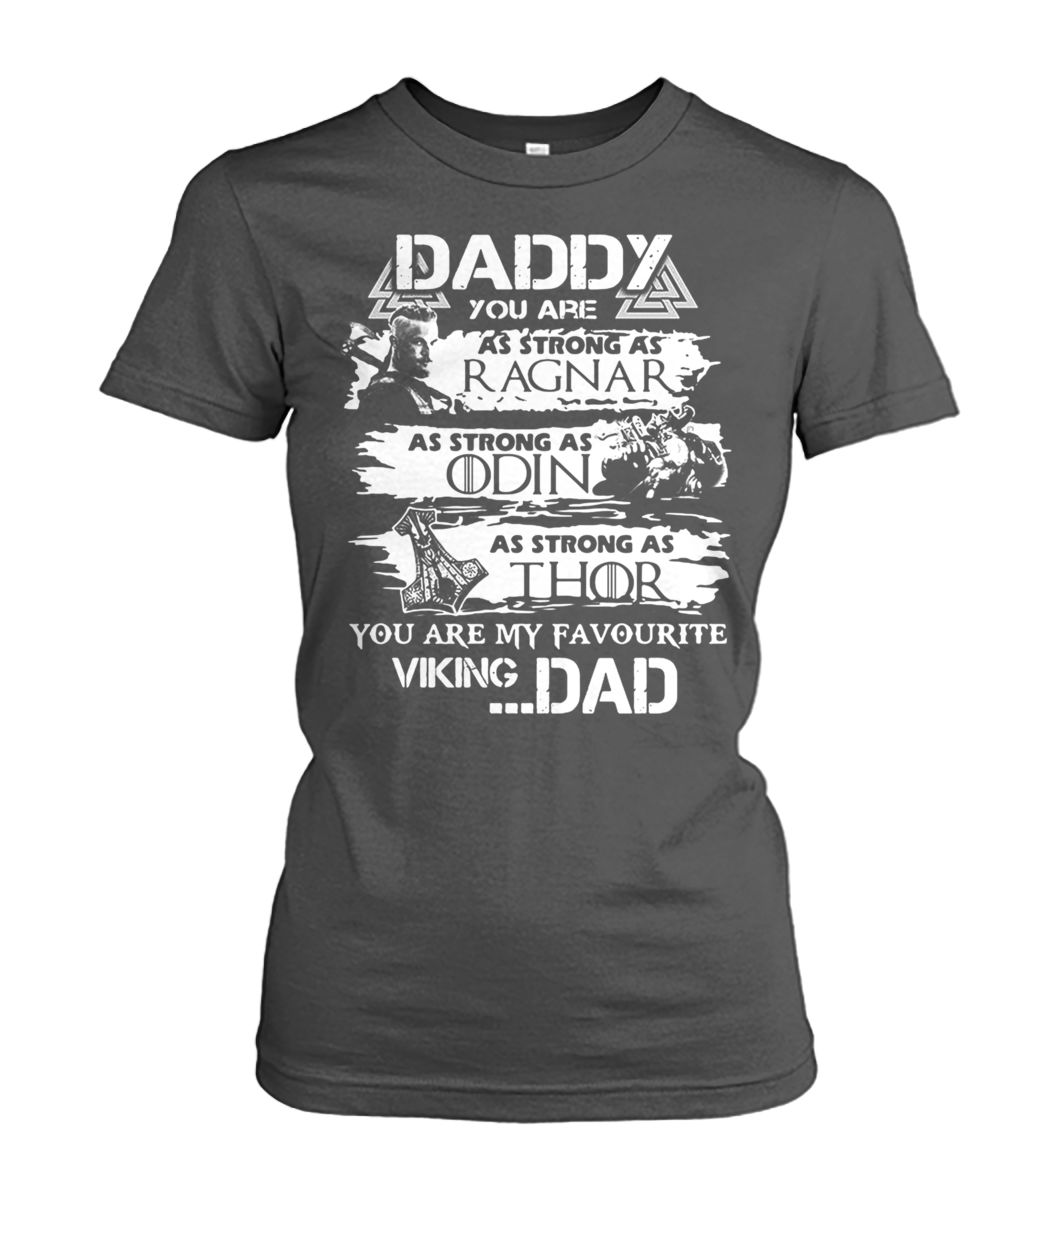 Daddy you are as brave as ragnar you are my favourite viking dad game of thrones women's crew tee